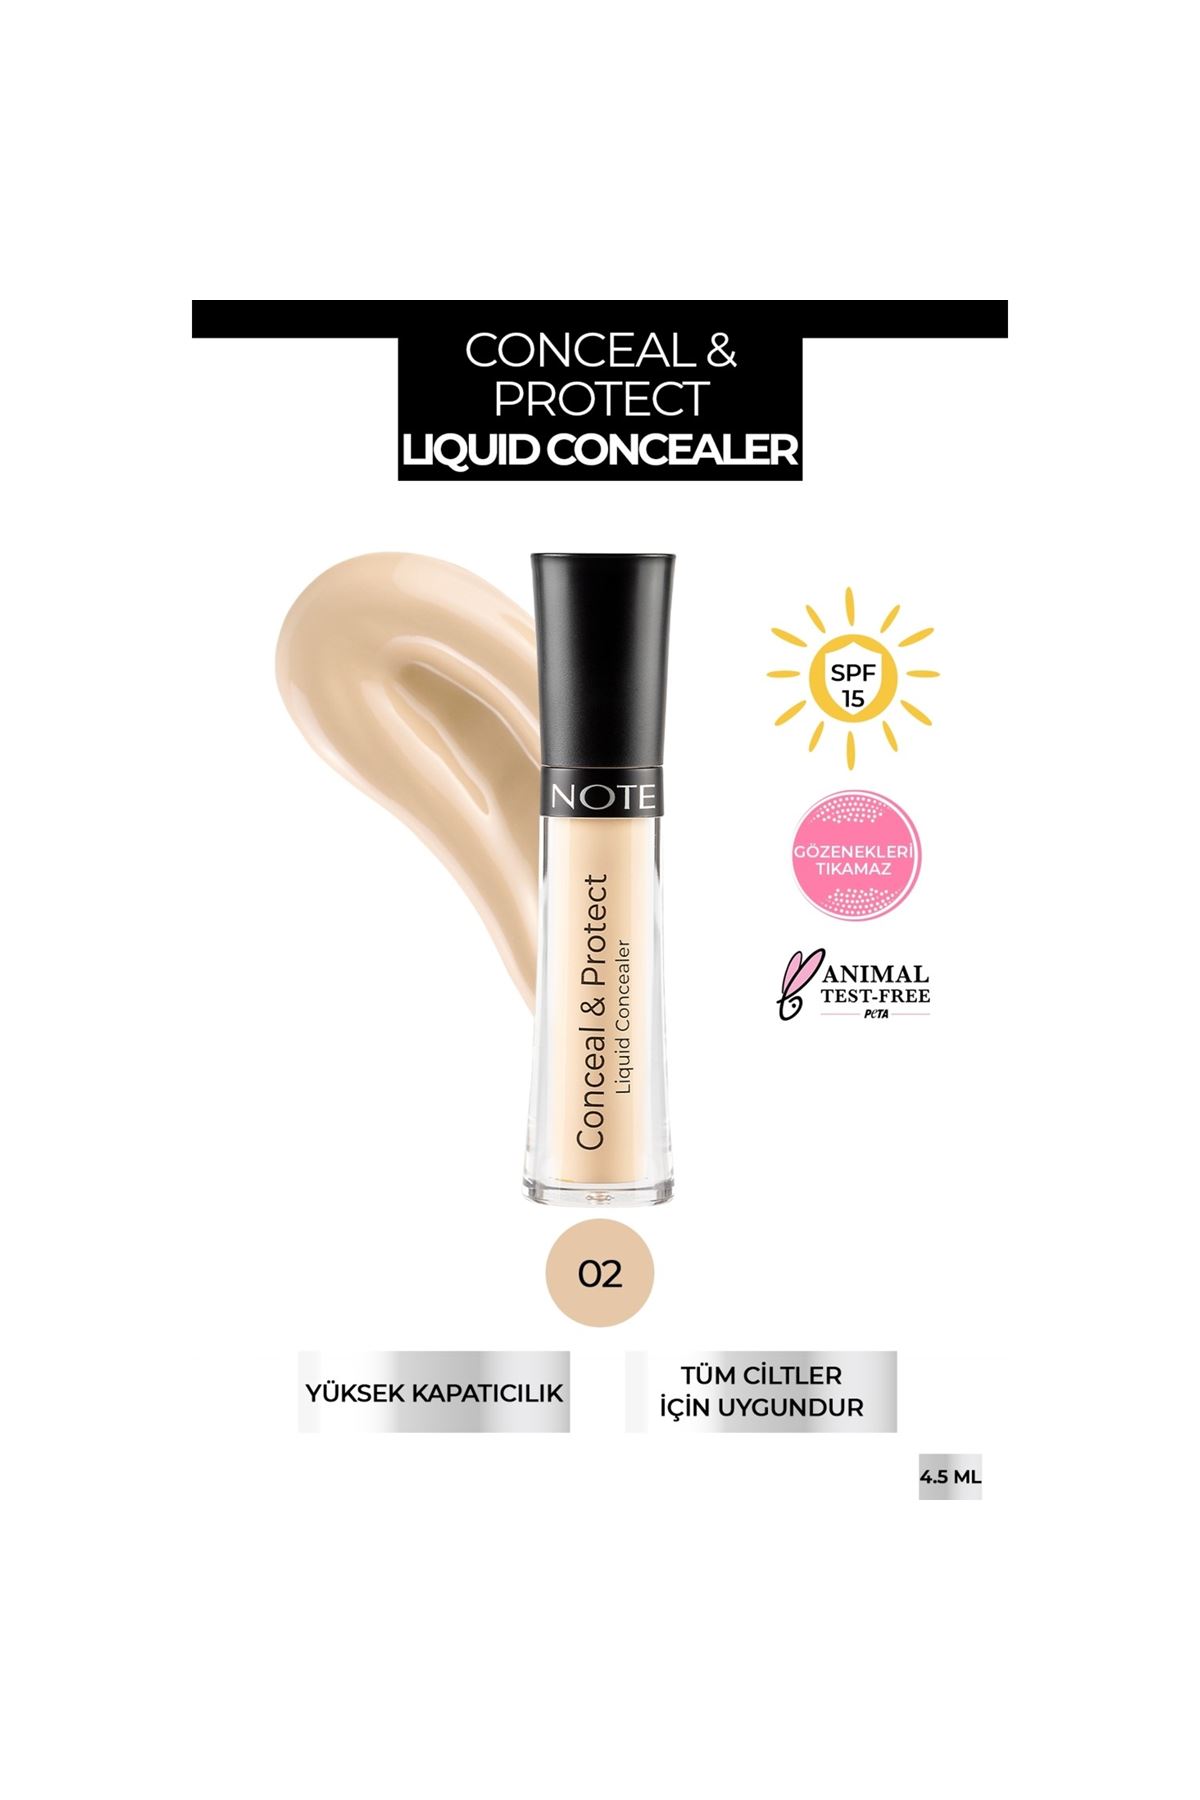 Note Conceal & Protect Likit Concealer - 02